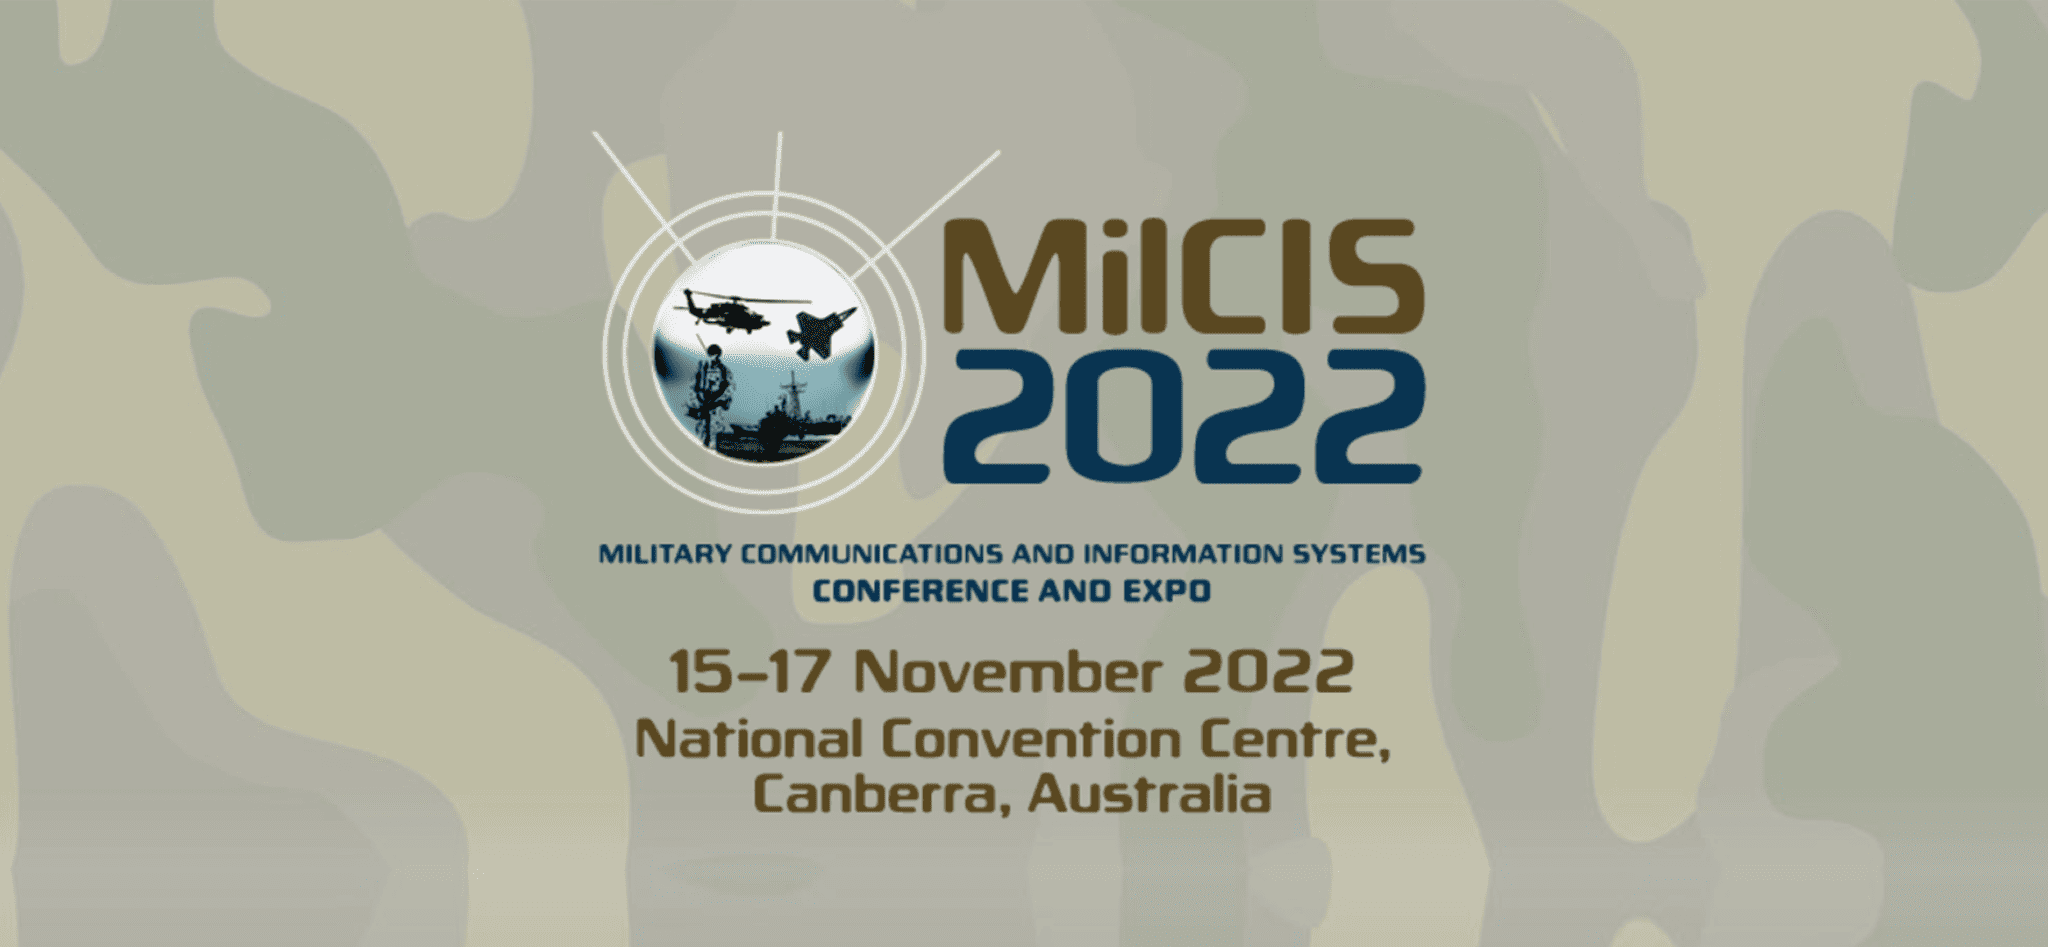 Fivecast is Exhibiting at MilCIS 2022 from November 15th to 17th